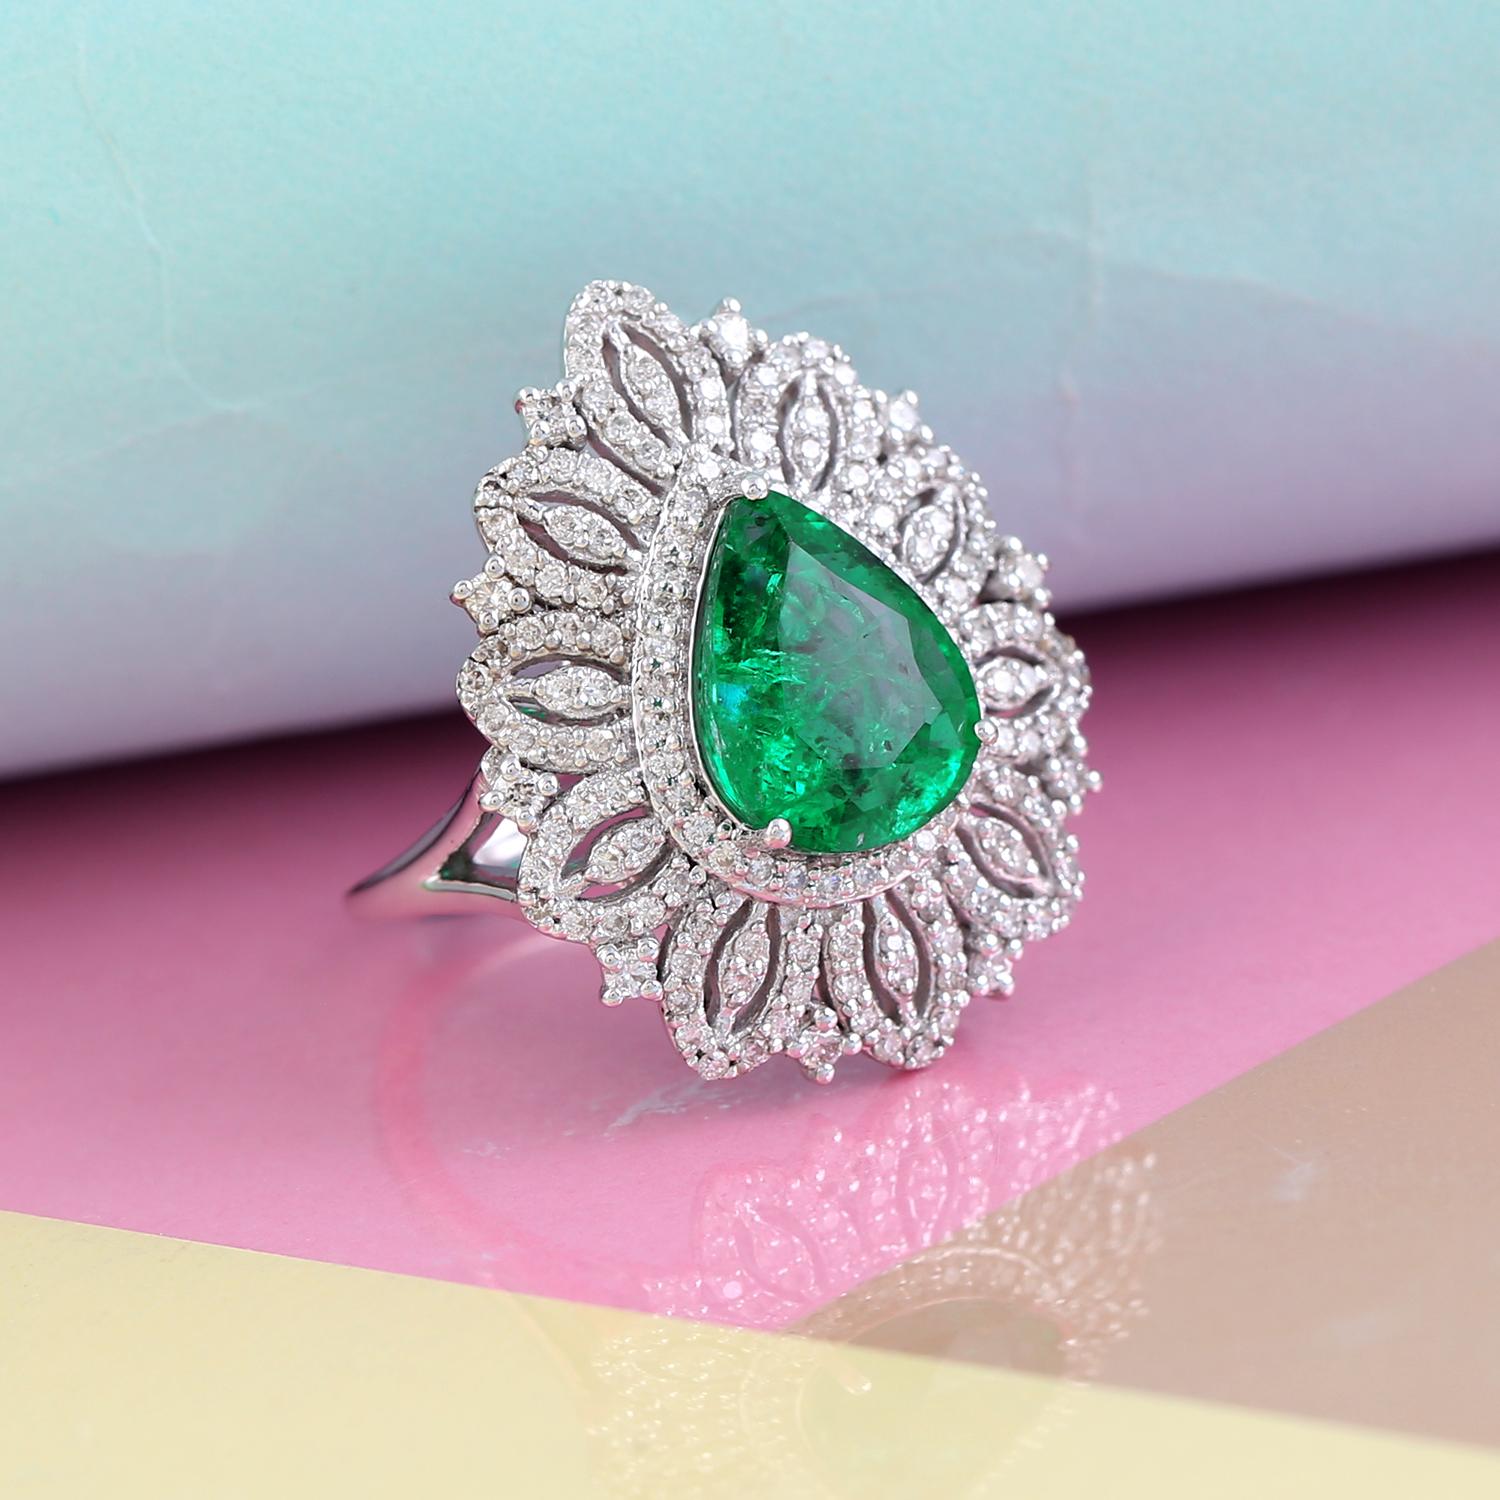 This exquisite ring features a stunning pear-shaped green emerald, surrounded by a sparkling array of diamonds, all set in 18k white gold. The emerald, with its deep green hue, is beautifully complemented by the brilliant diamonds, which enhance the